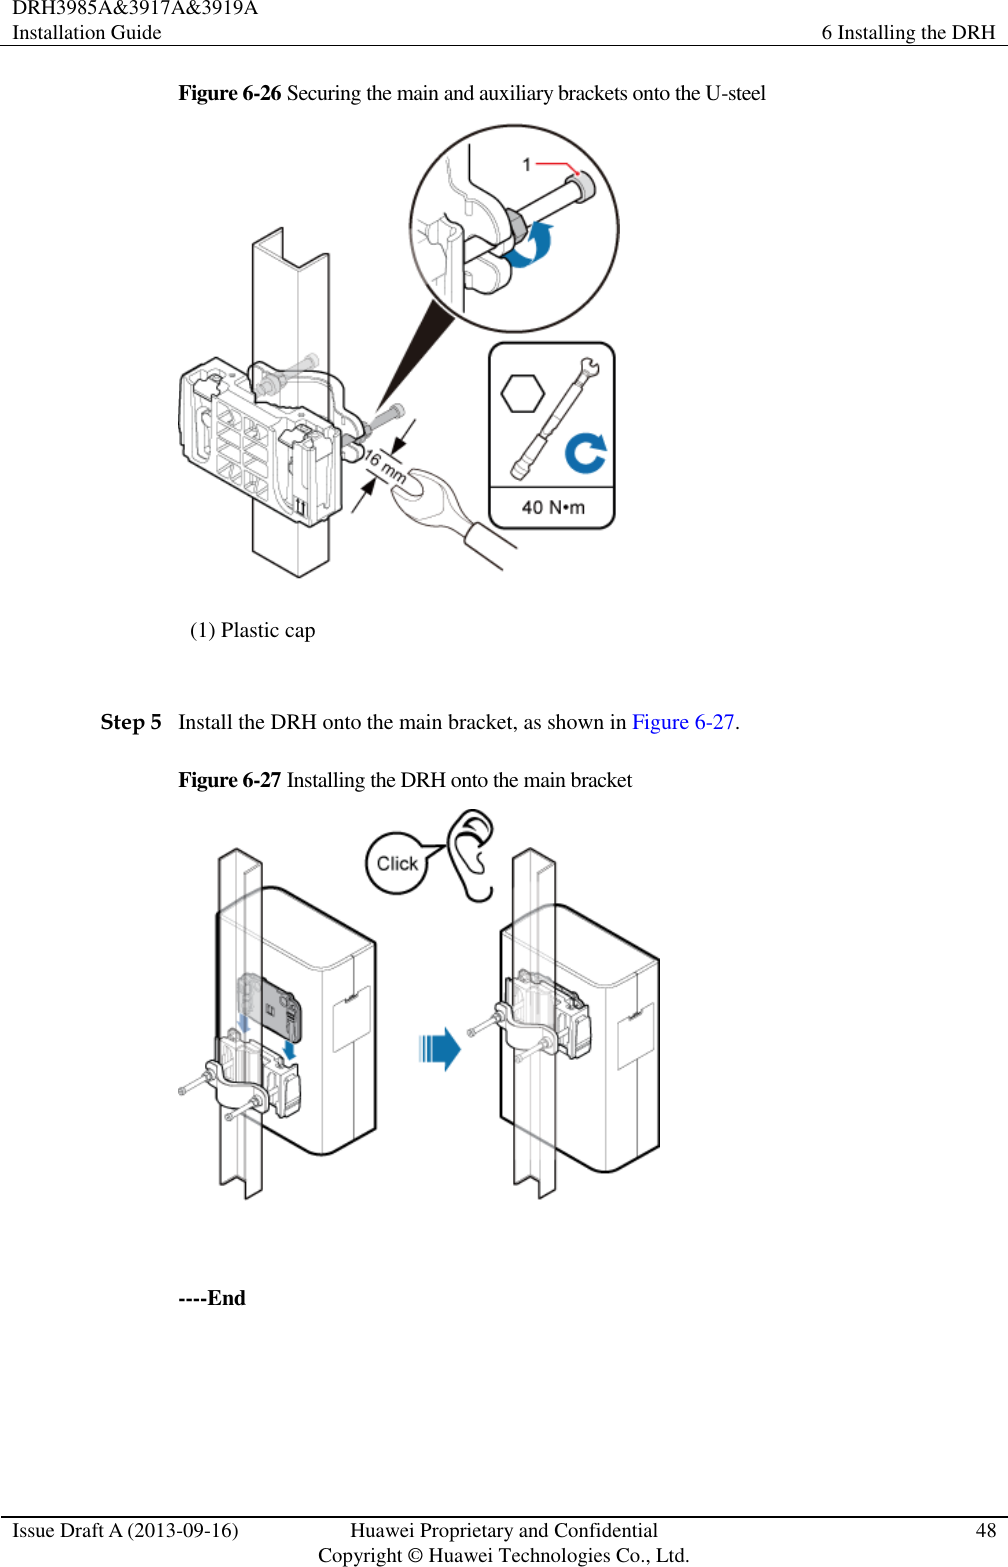 DRH3985A&amp;3917A&amp;3919A Installation Guide 6 Installing the DRH  Issue Draft A (2013-09-16) Huawei Proprietary and Confidential                                     Copyright © Huawei Technologies Co., Ltd. 48  Figure 6-26 Securing the main and auxiliary brackets onto the U-steel  (1) Plastic cap  Step 5 Install the DRH onto the main bracket, as shown in Figure 6-27. Figure 6-27 Installing the DRH onto the main bracket   ----End 